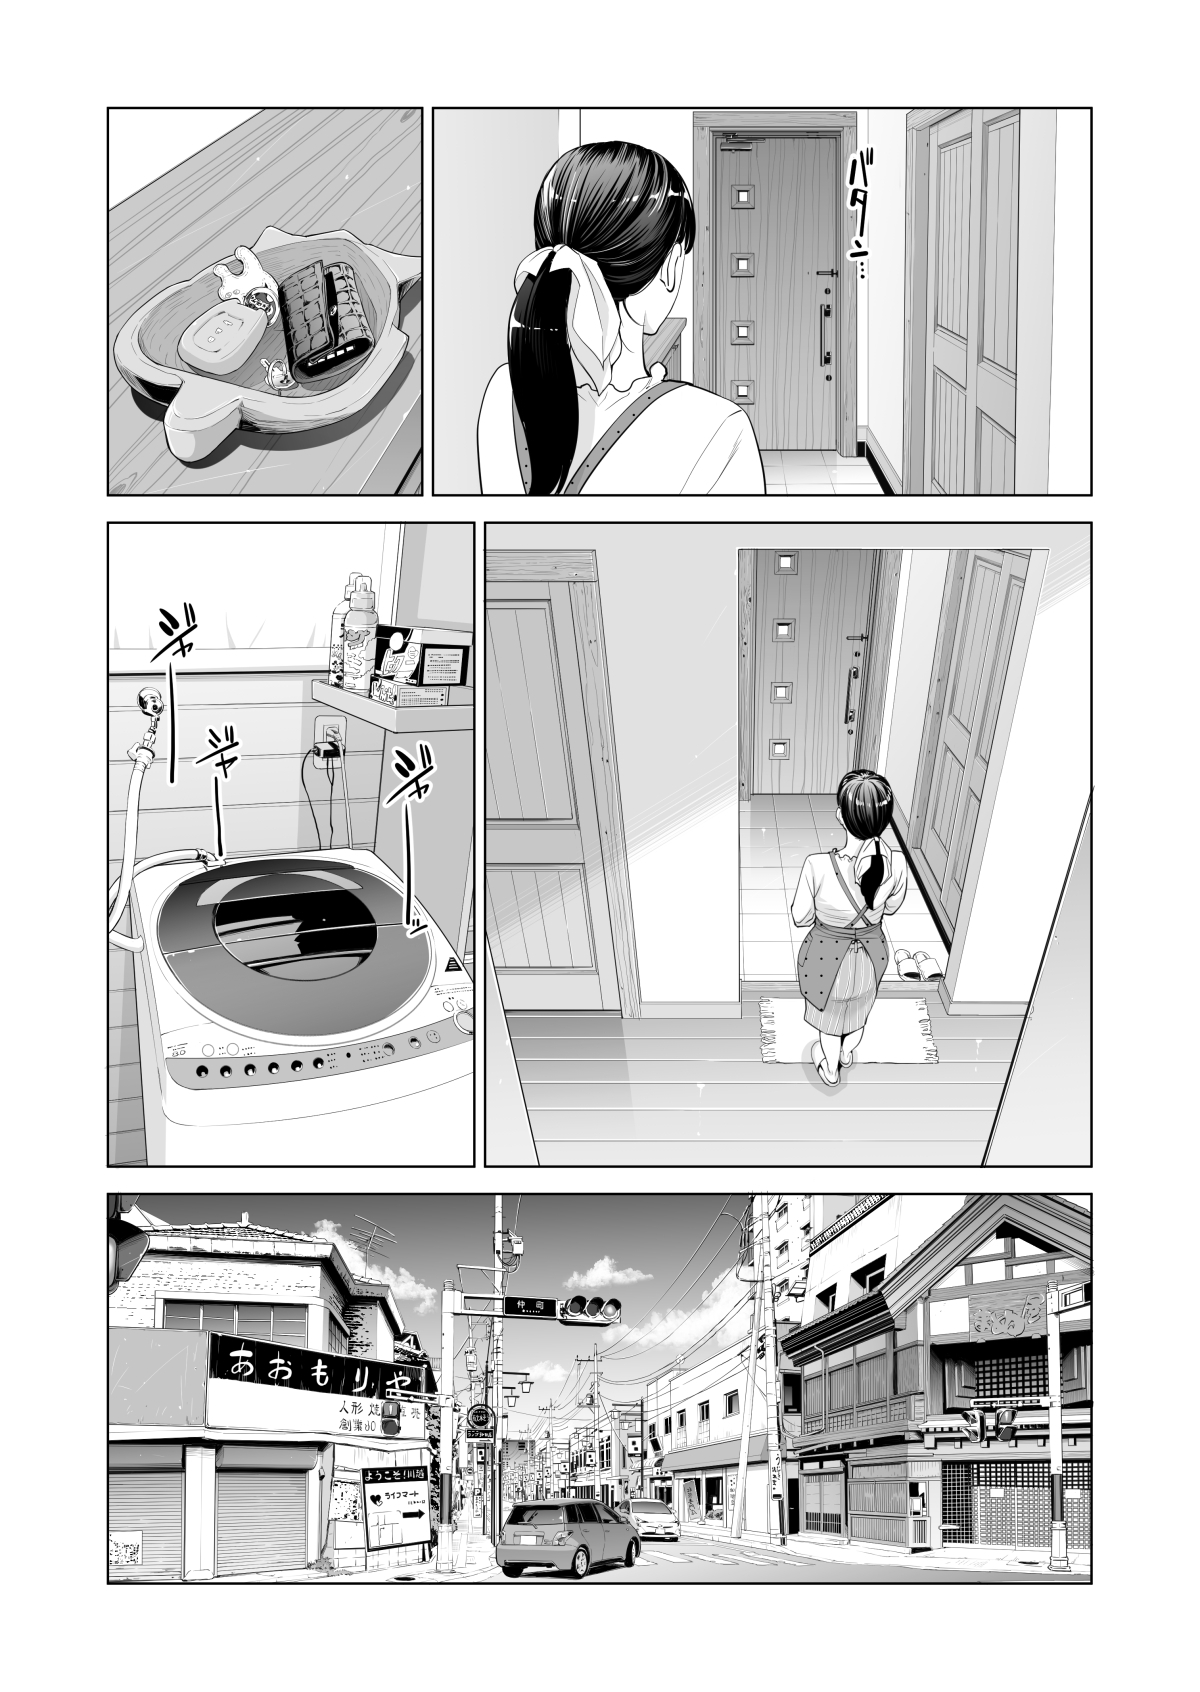 Tsukiyo no Midare Zake  Moonlit Intoxication ~ A Housewife Stolen by a Coworker Besides her Blackout Drunk Husband ~ Chapter 1 numero d'image 7